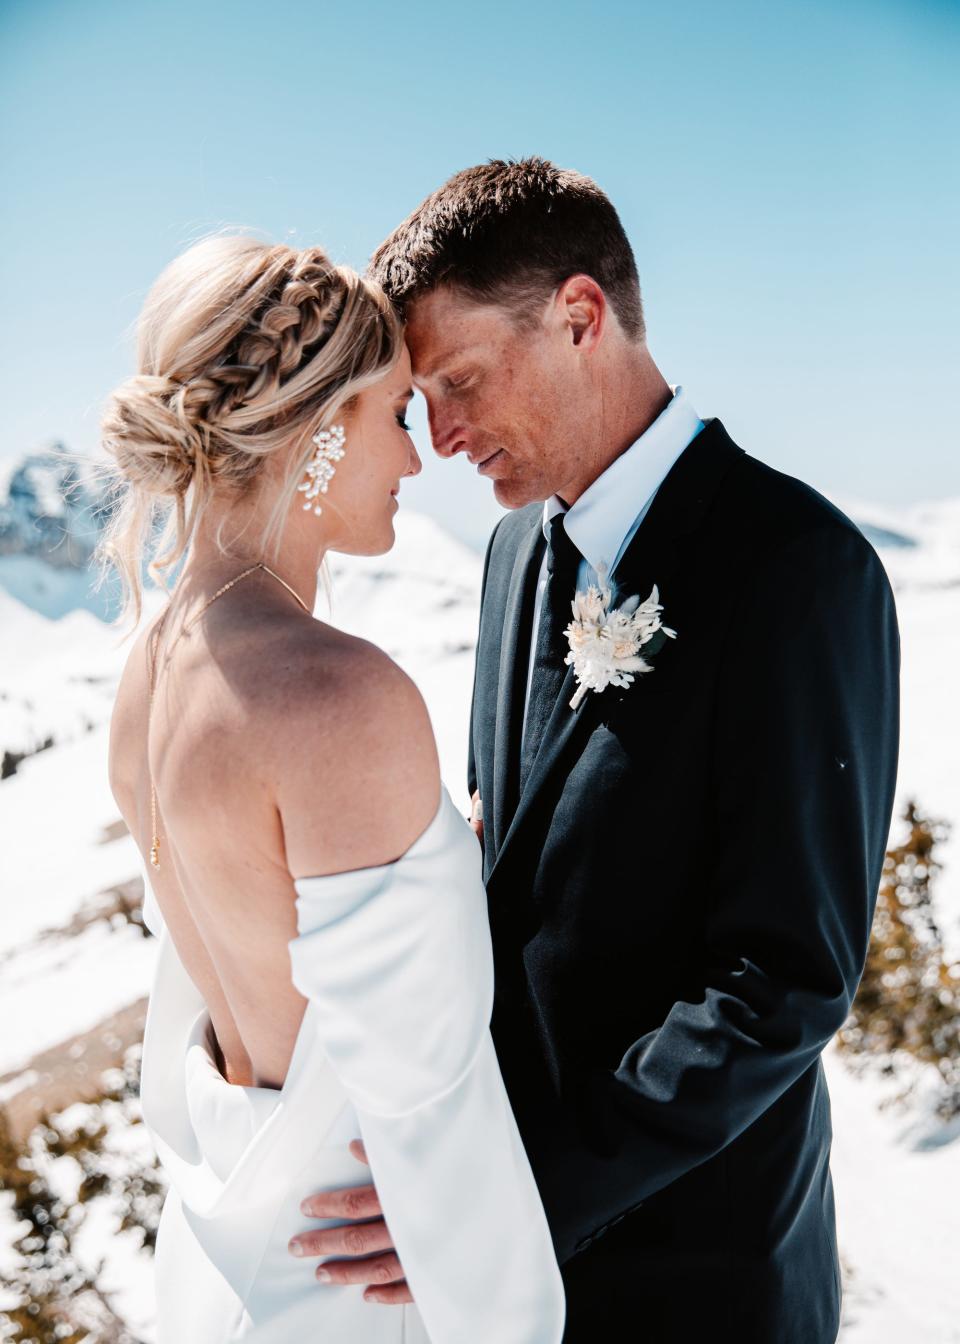 A bride and groom touch foreheads on top of a snowy mountain.